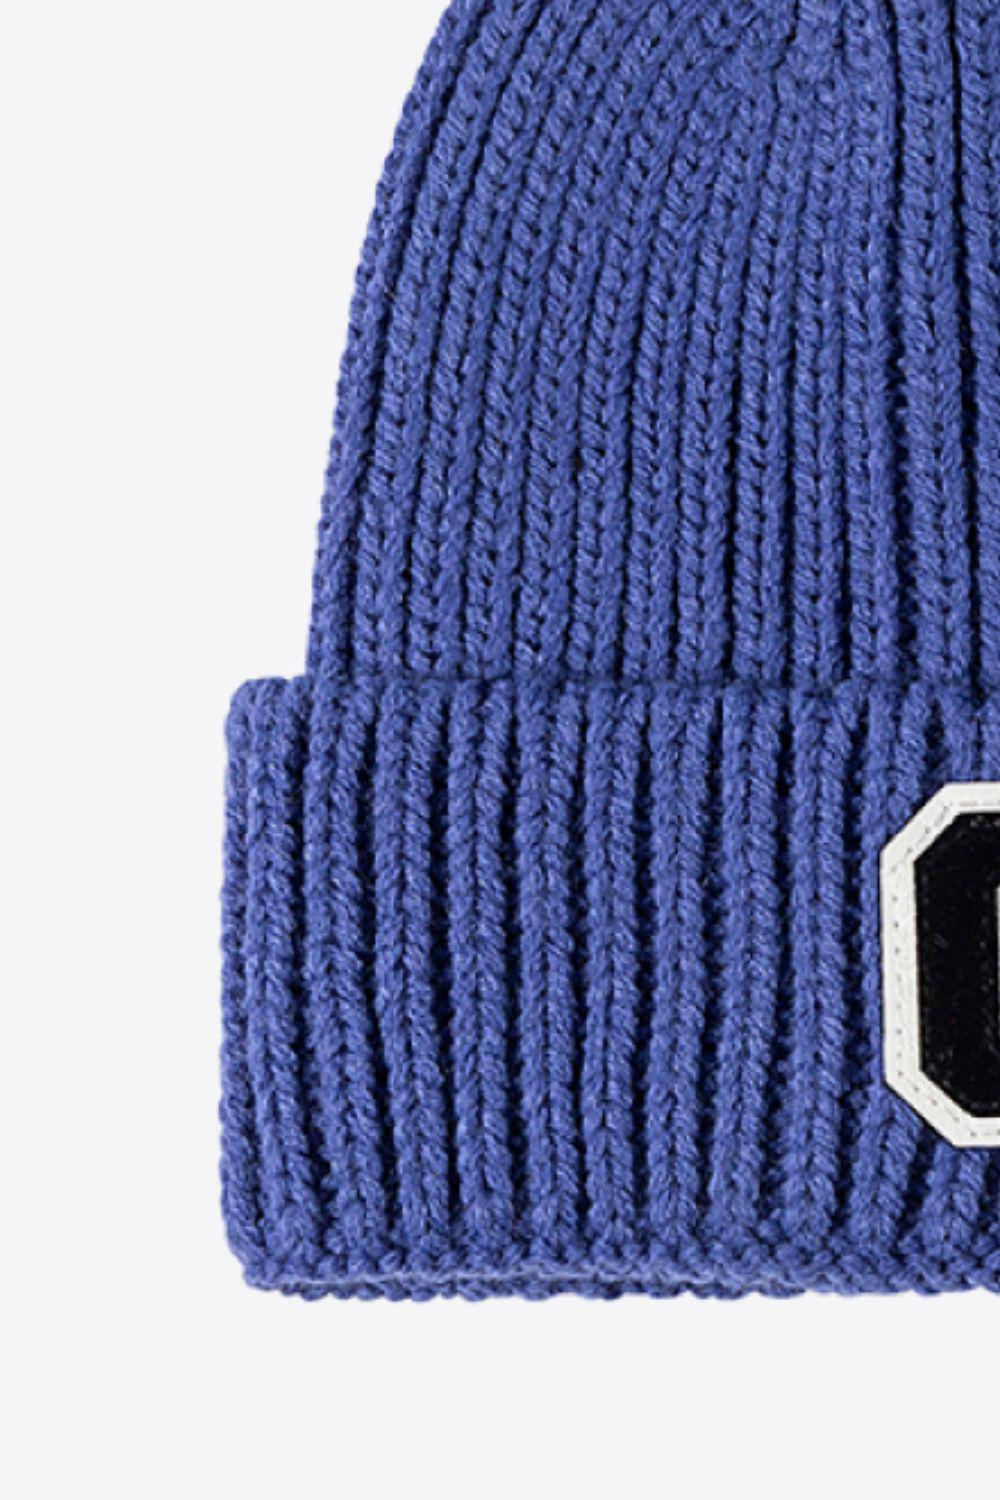 Letter C Patch Cuffed Beanie-[Adult]-[Female]-2022 Online Blue Zone Planet